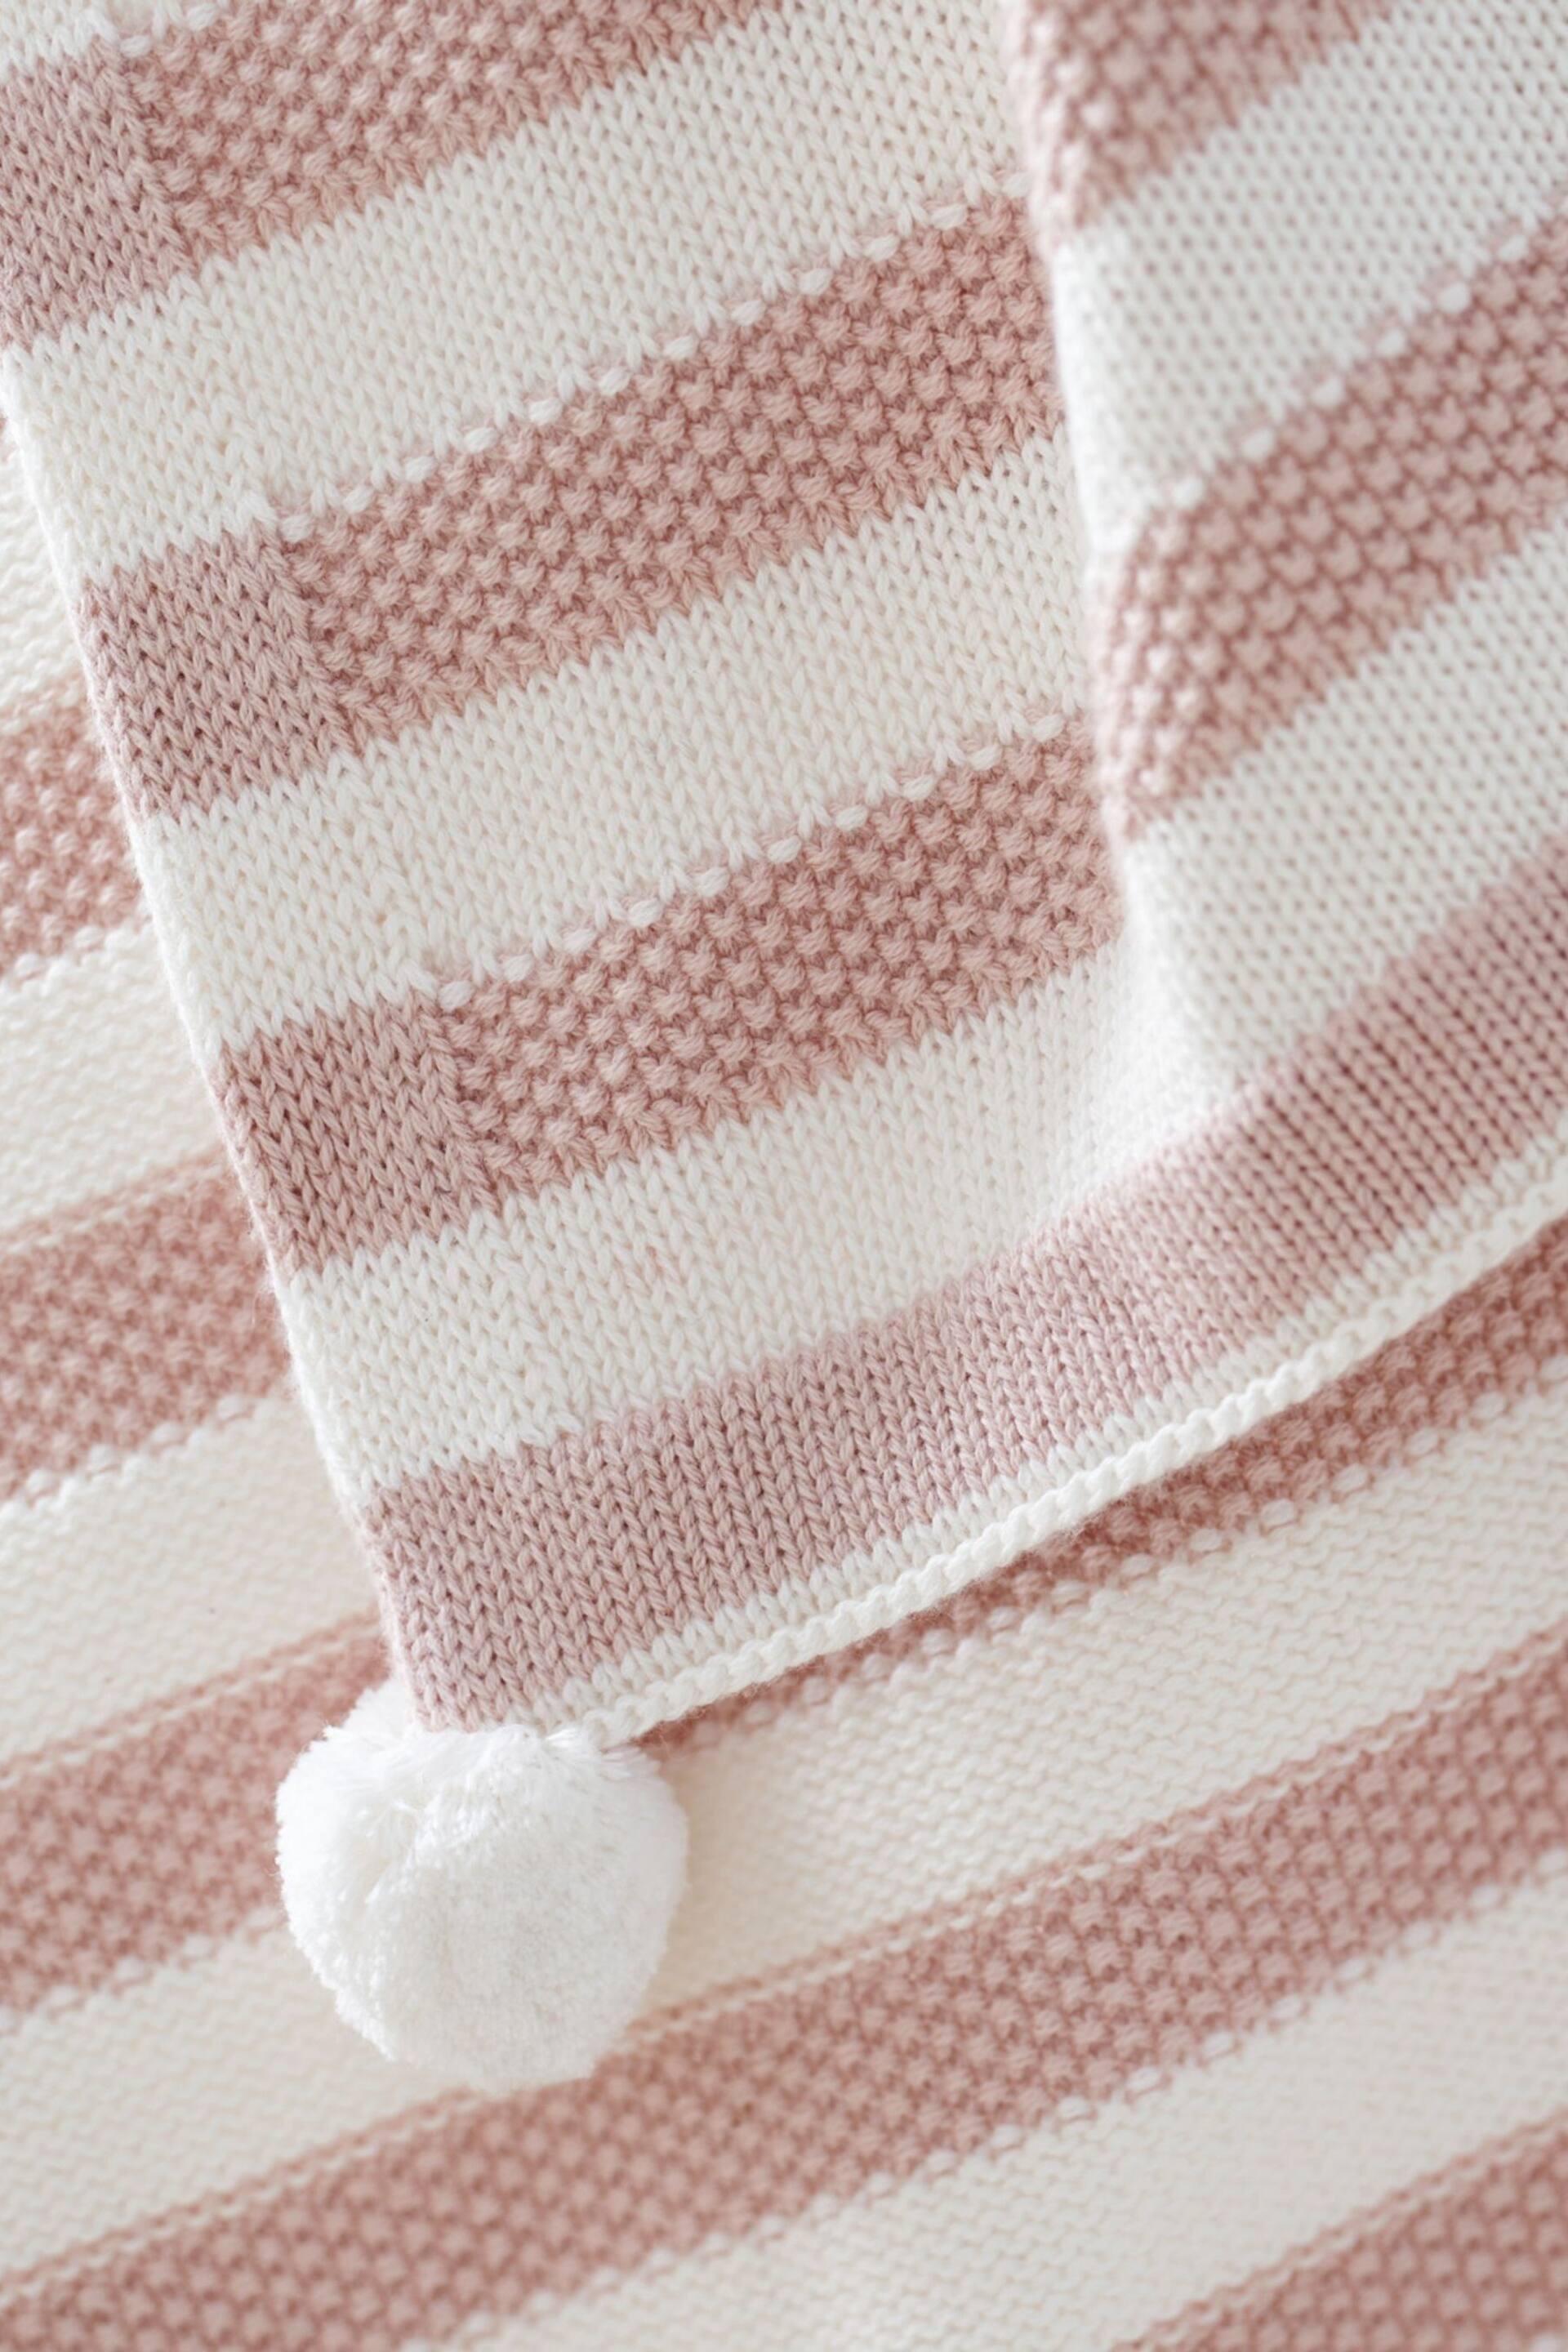 The White Company Pink Stripe Cotton Cashmere Baby Blanket - Image 2 of 2